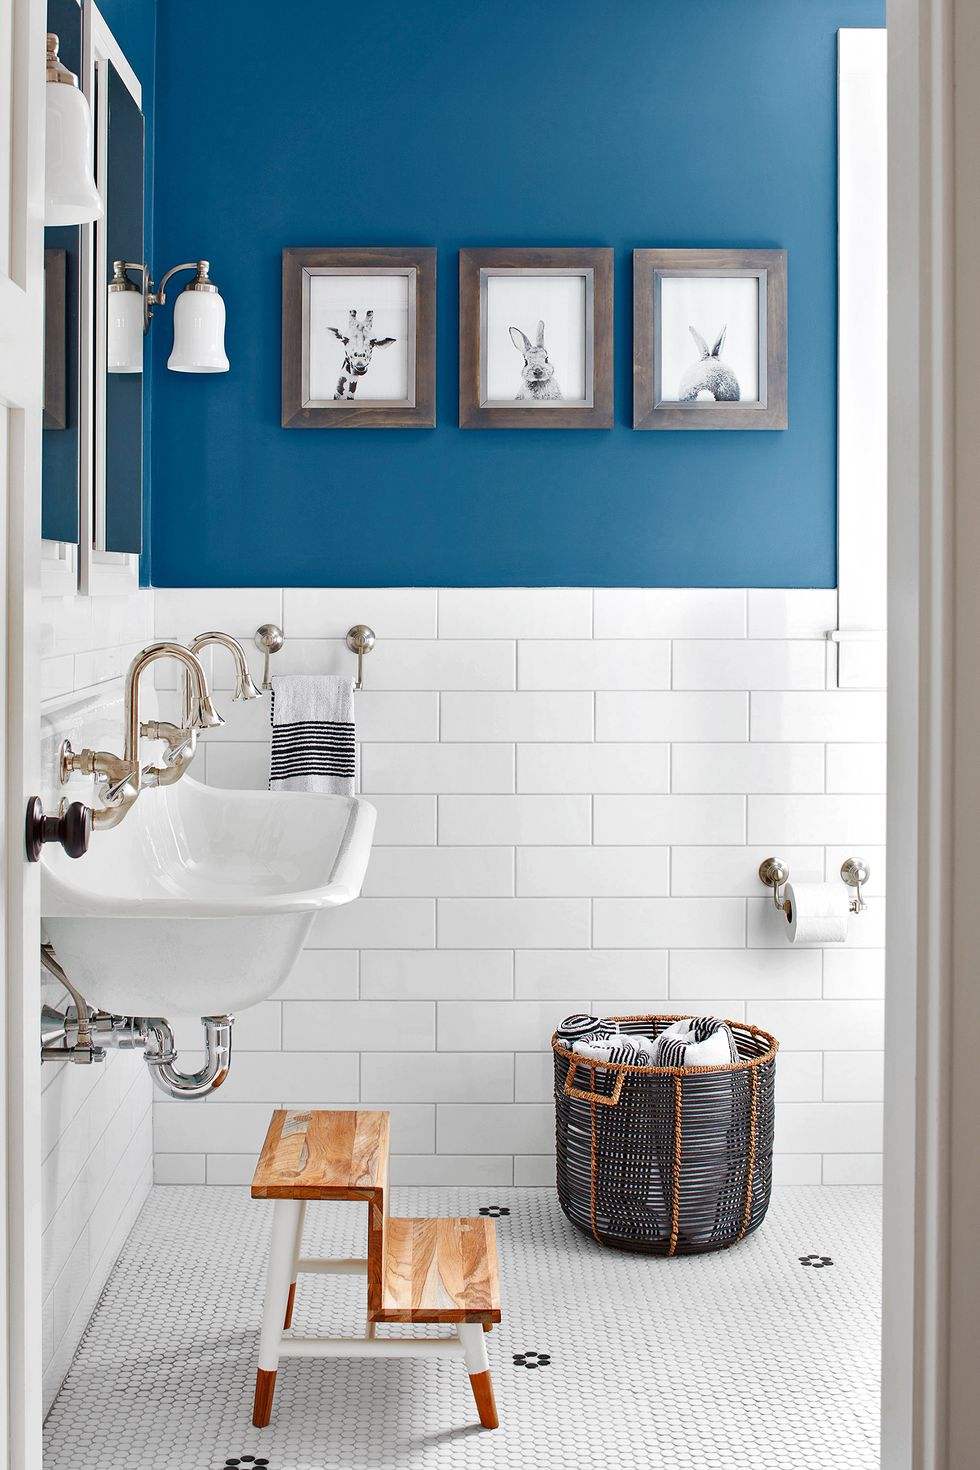 Here is an overview of our quick and simple bathroom decorating ideas:  Paint. Paint your walls c…